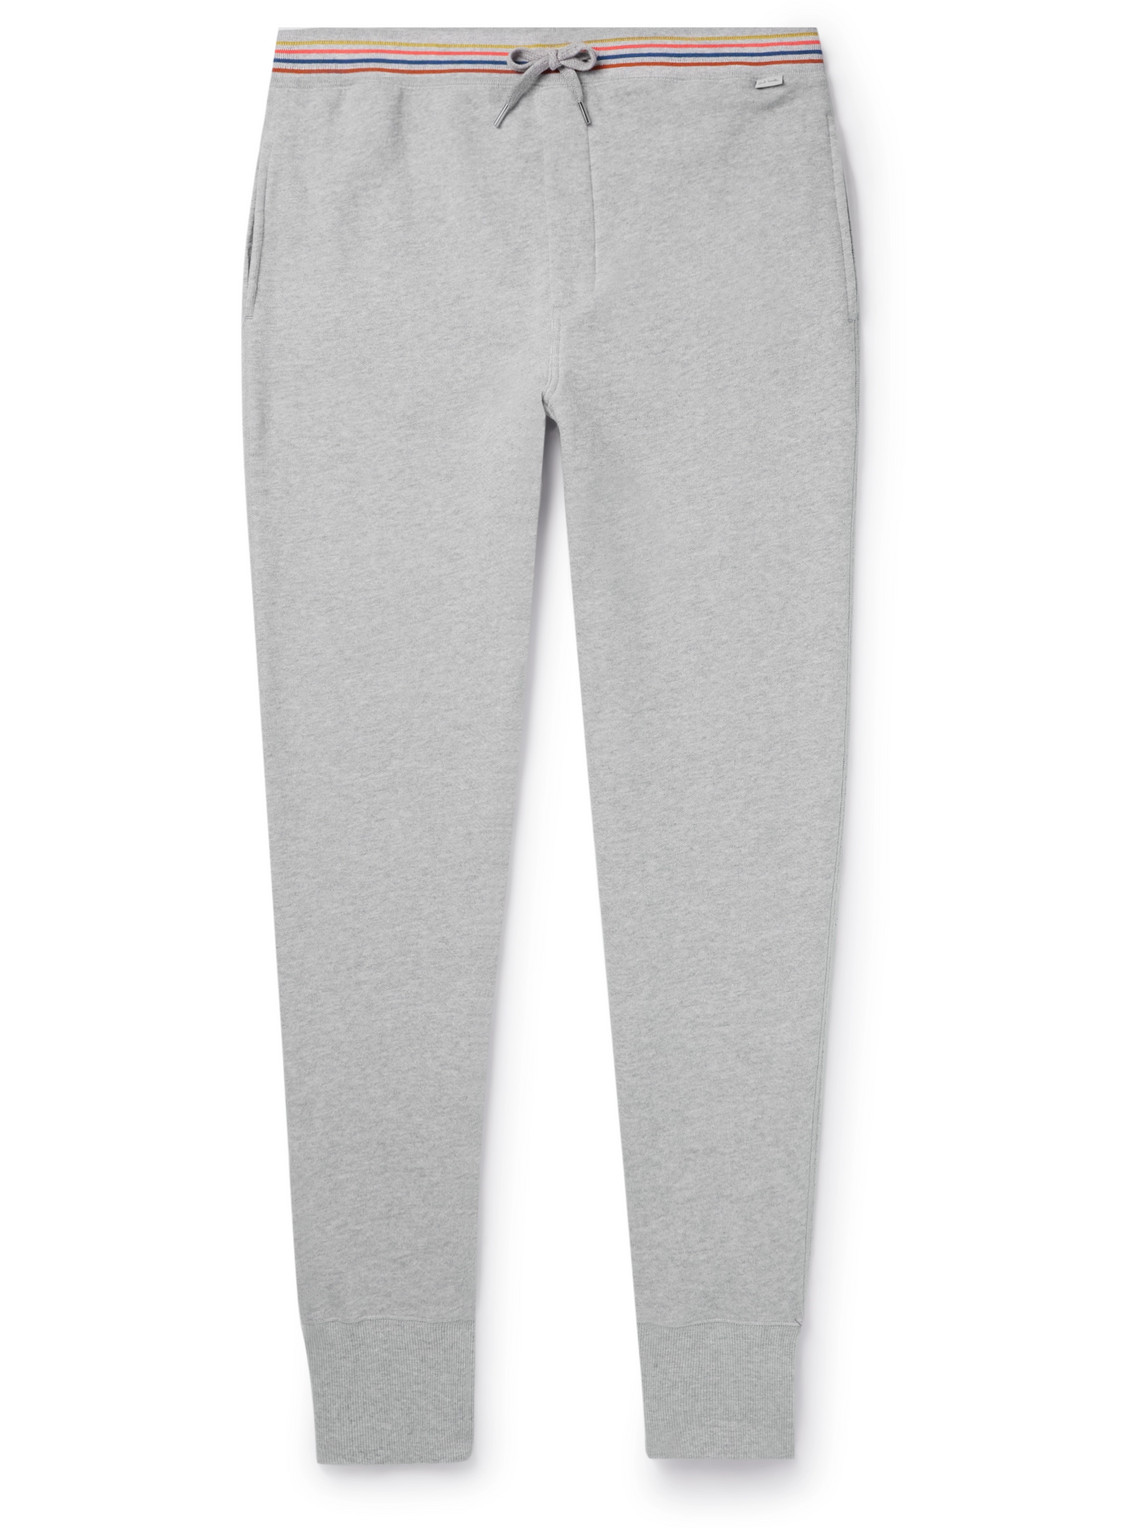 Paul Smith - Tapered Cotton-Jersey Sweatpants - Men - Gray - S von Paul Smith